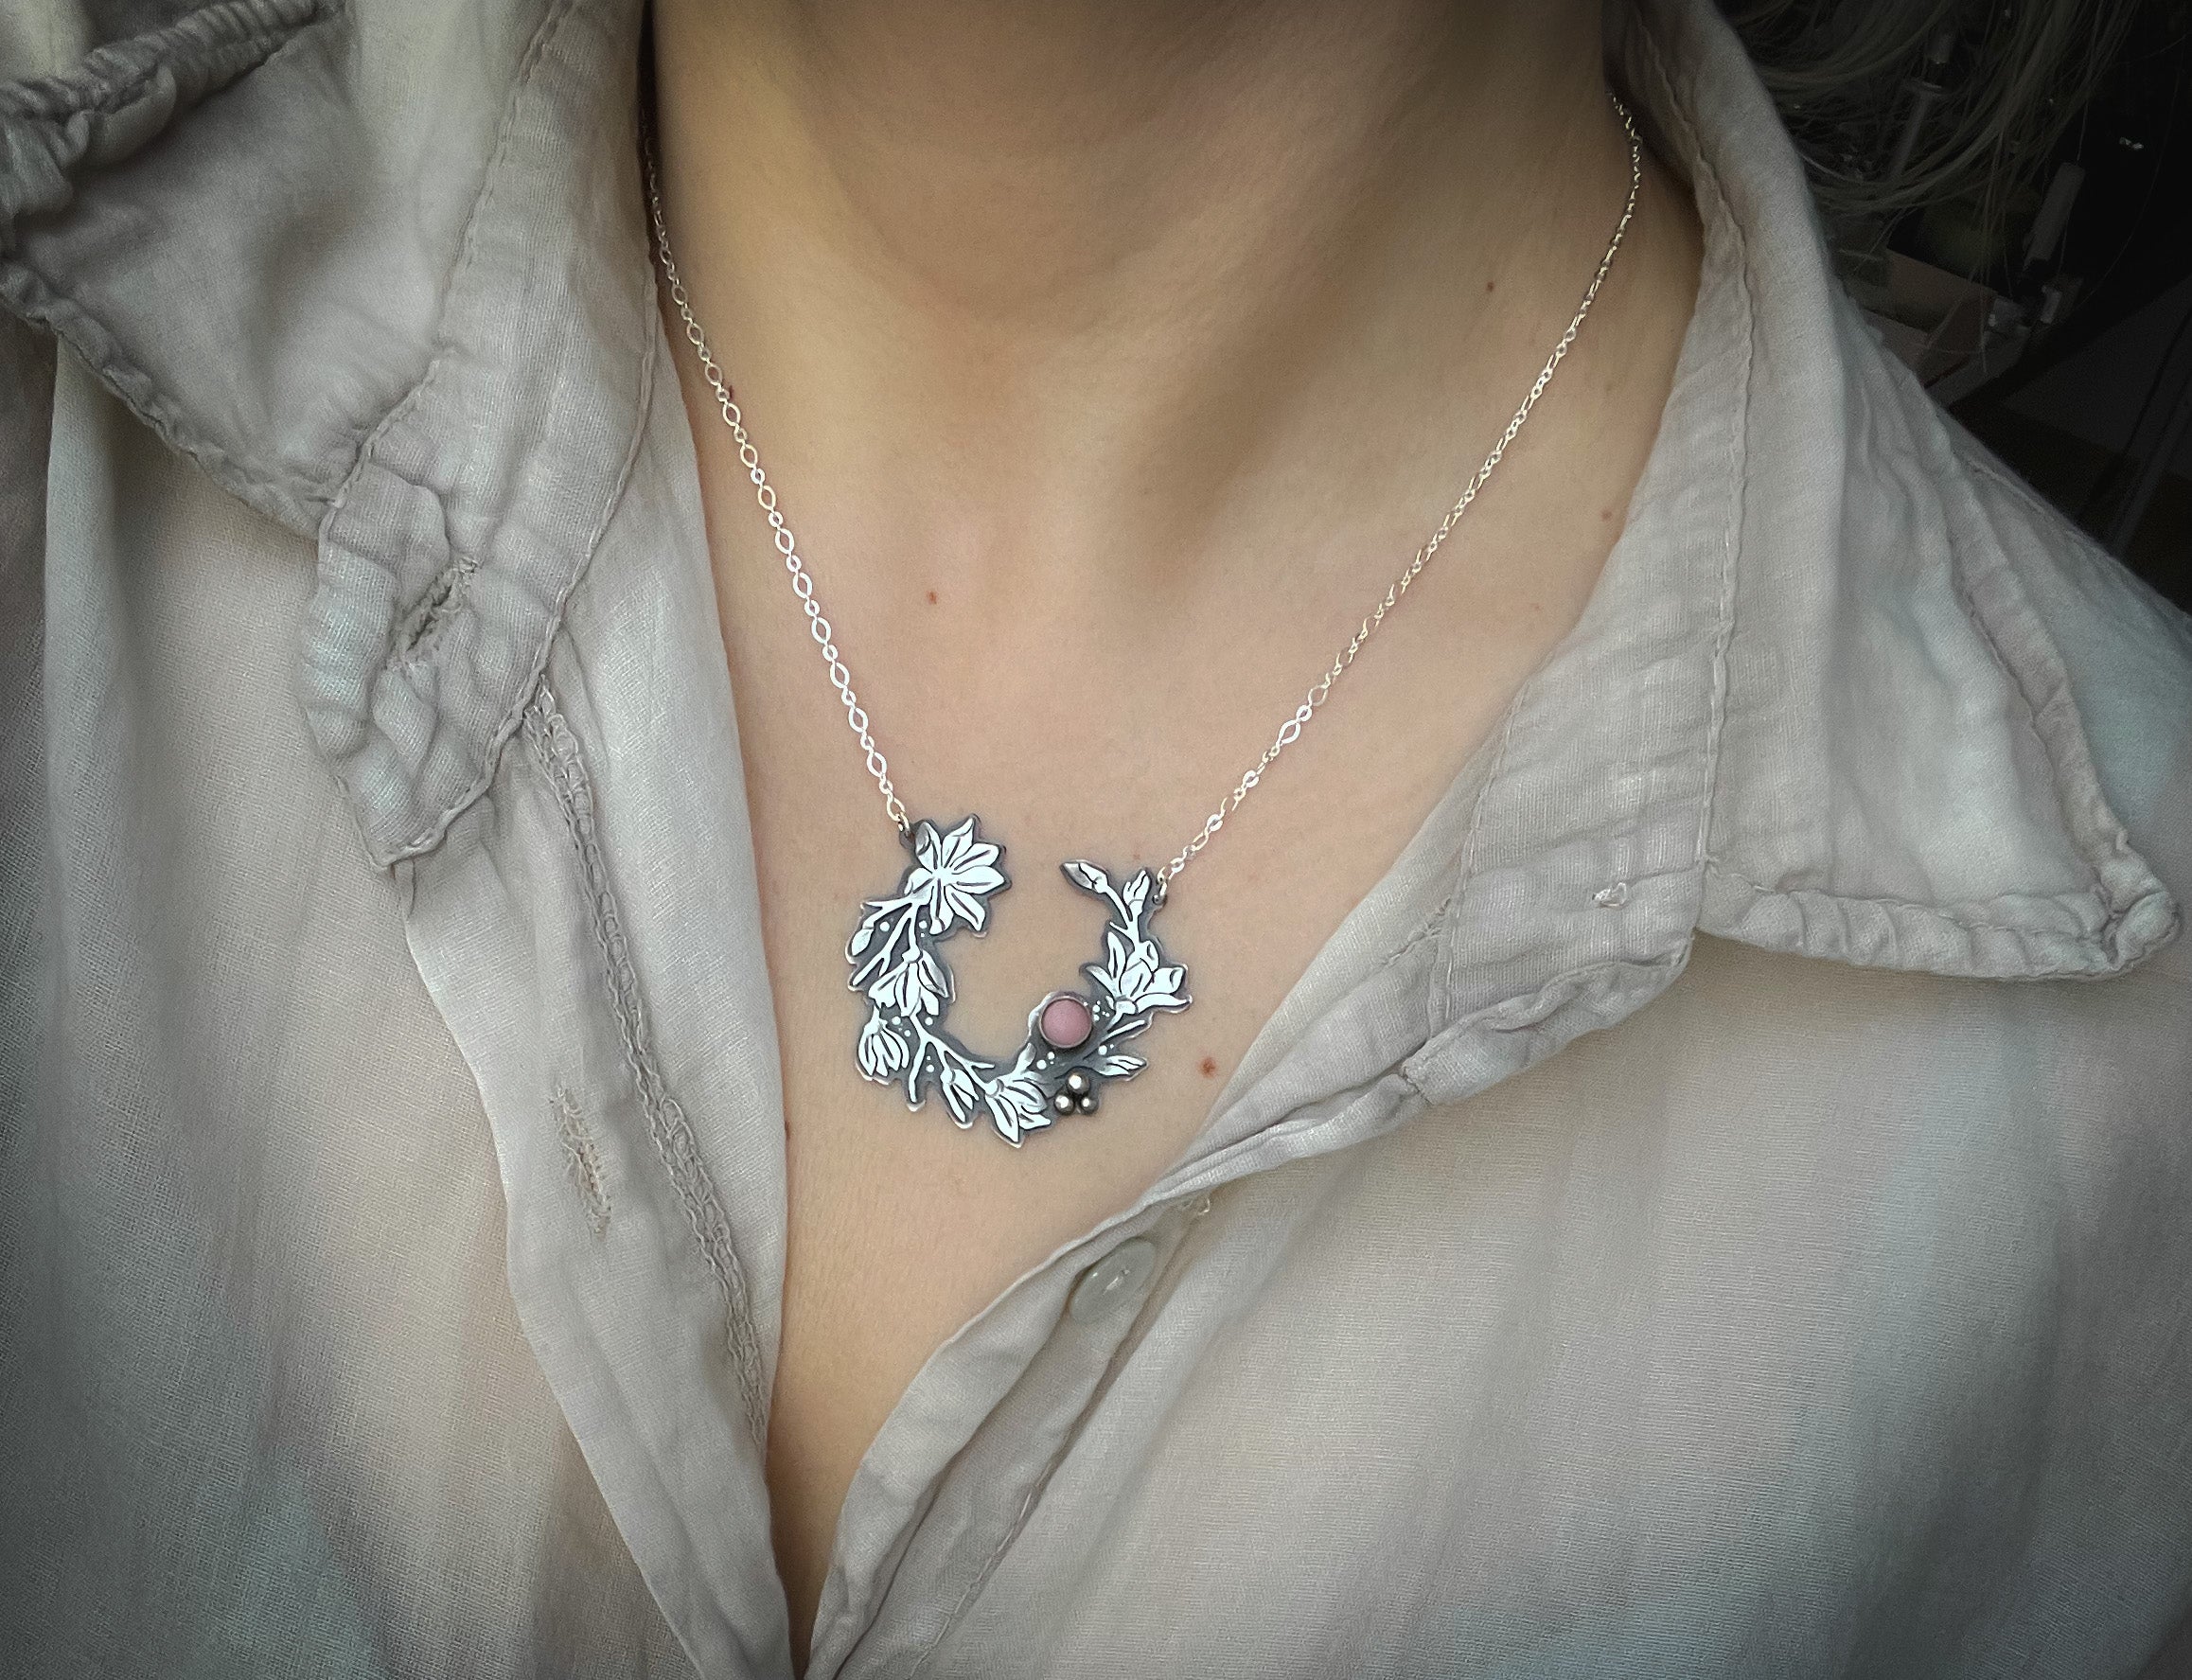 The Magnolia & Pink Peruvian Opal Necklace